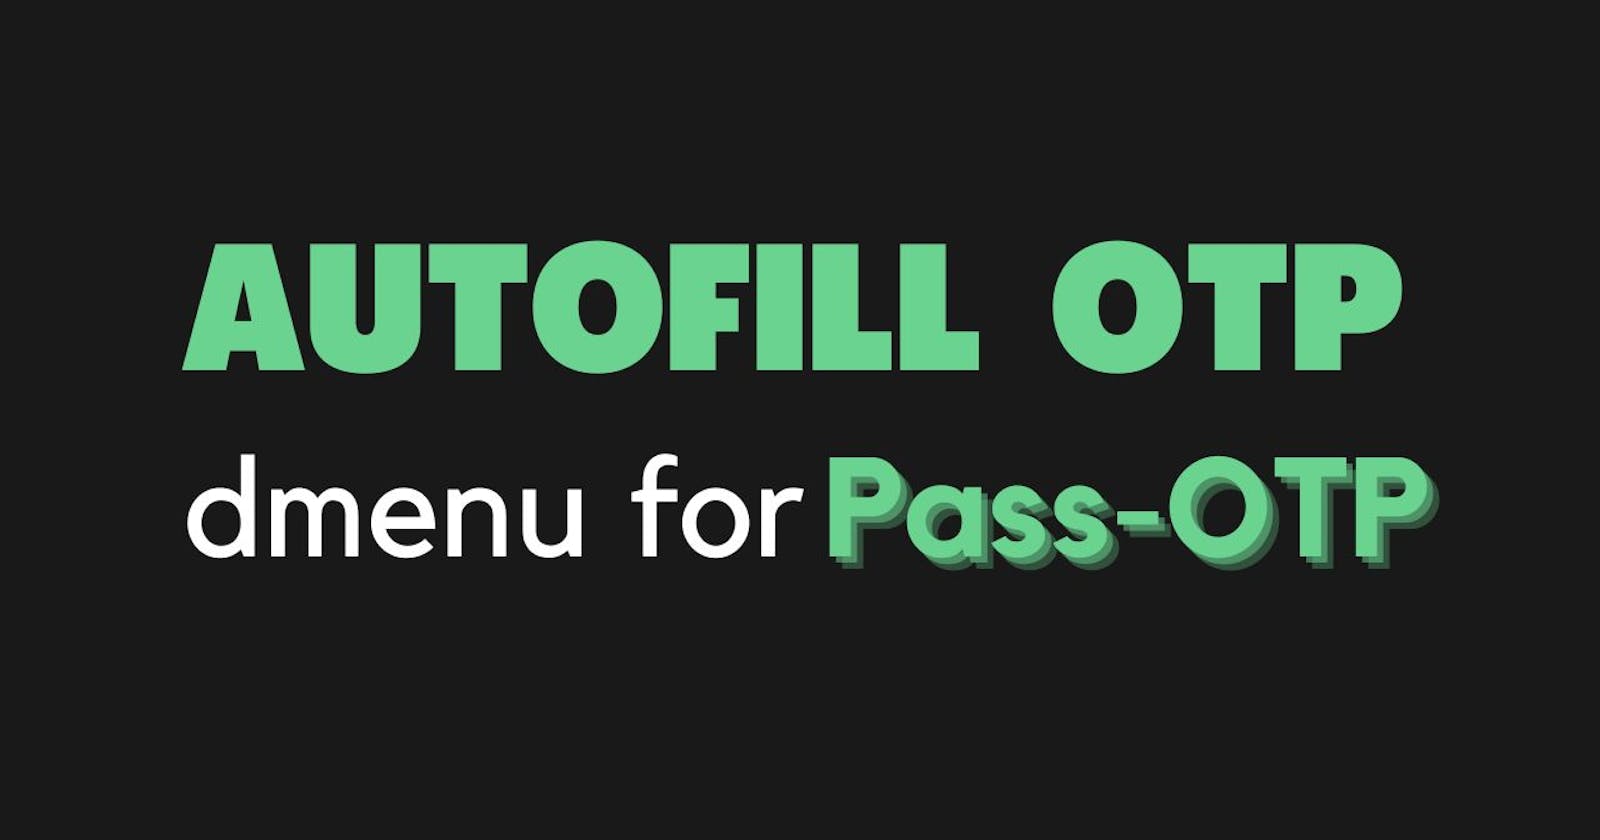 How to Setup and Autofill OTP Using Pass-OTP?